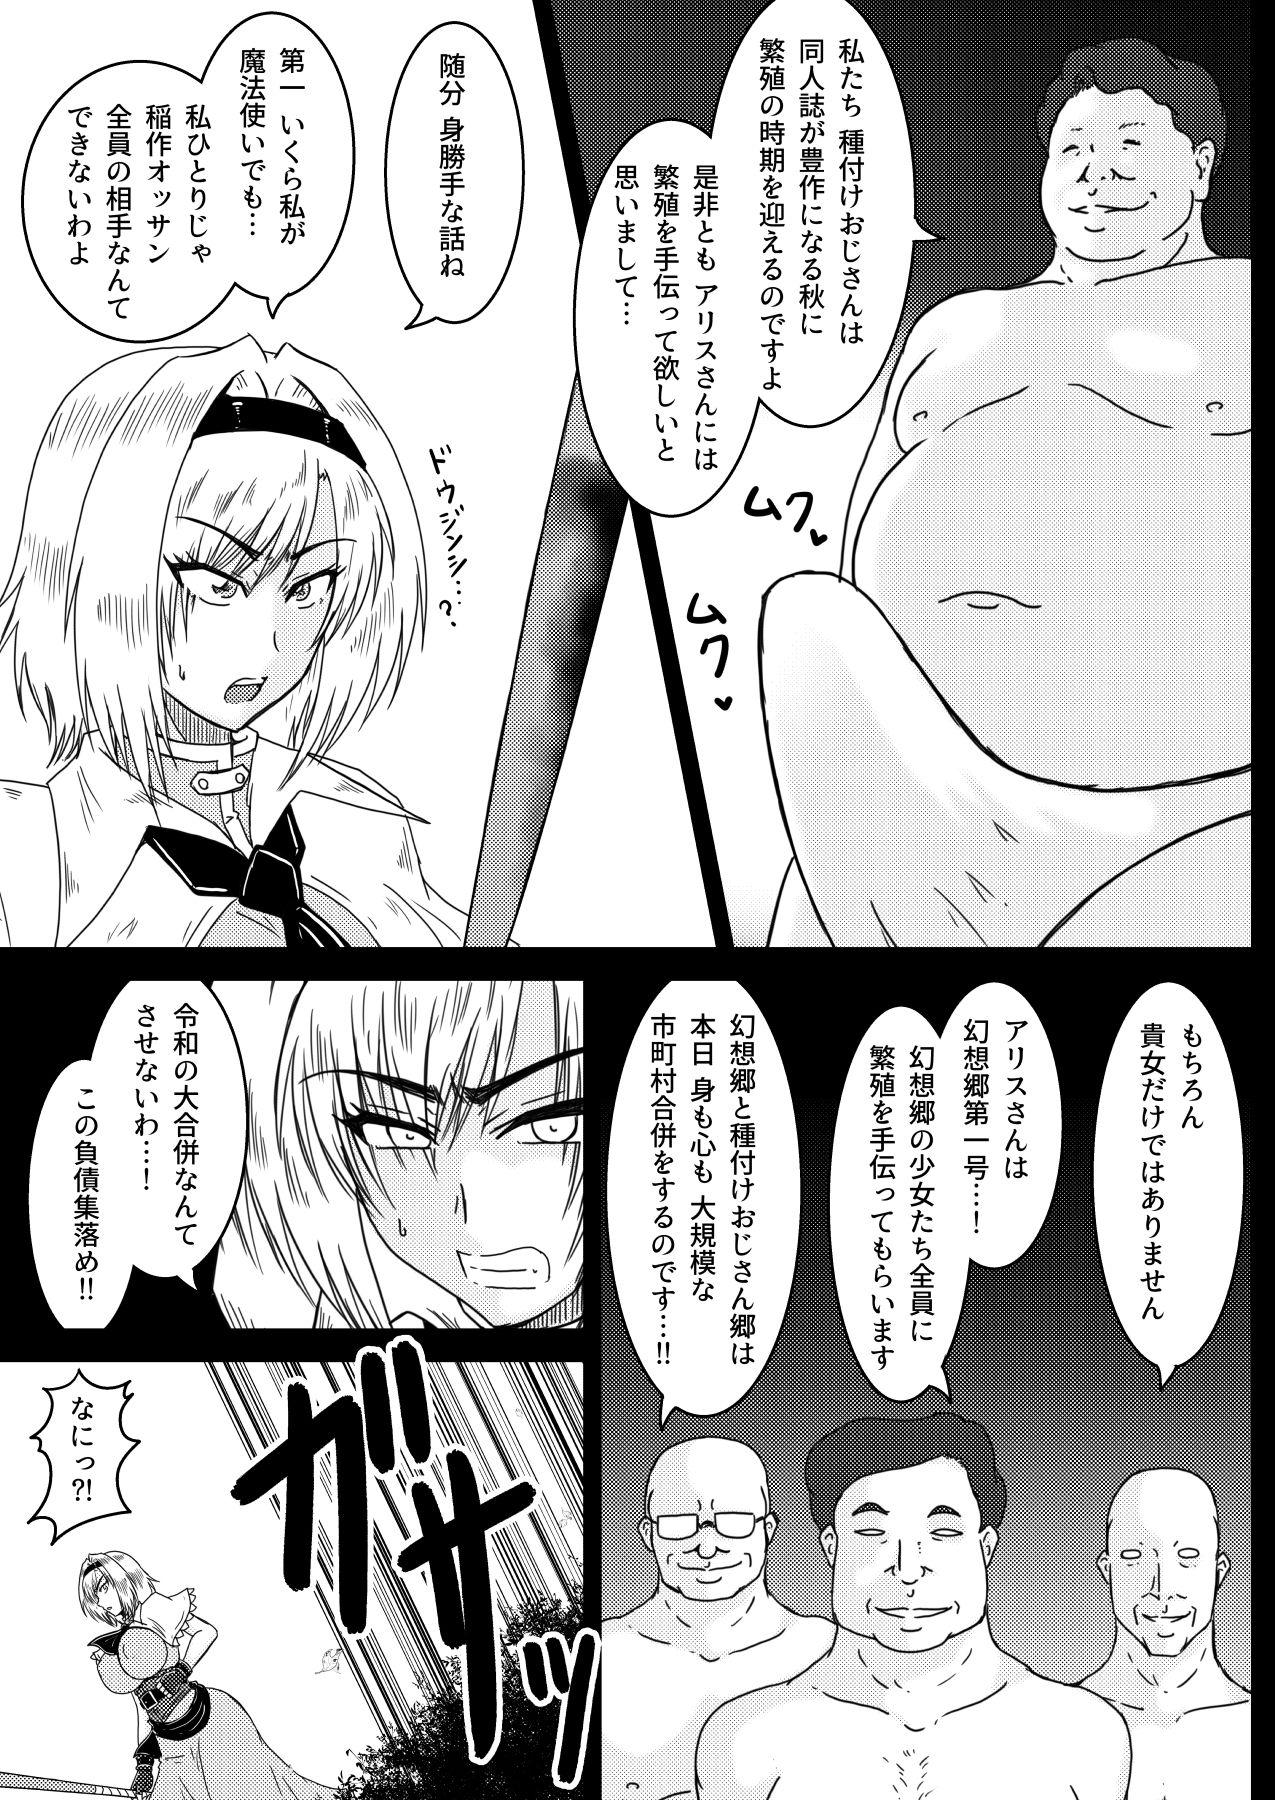 Jerk 種付けおじさん百鬼夜行 - Touhou project Fat - Page 6